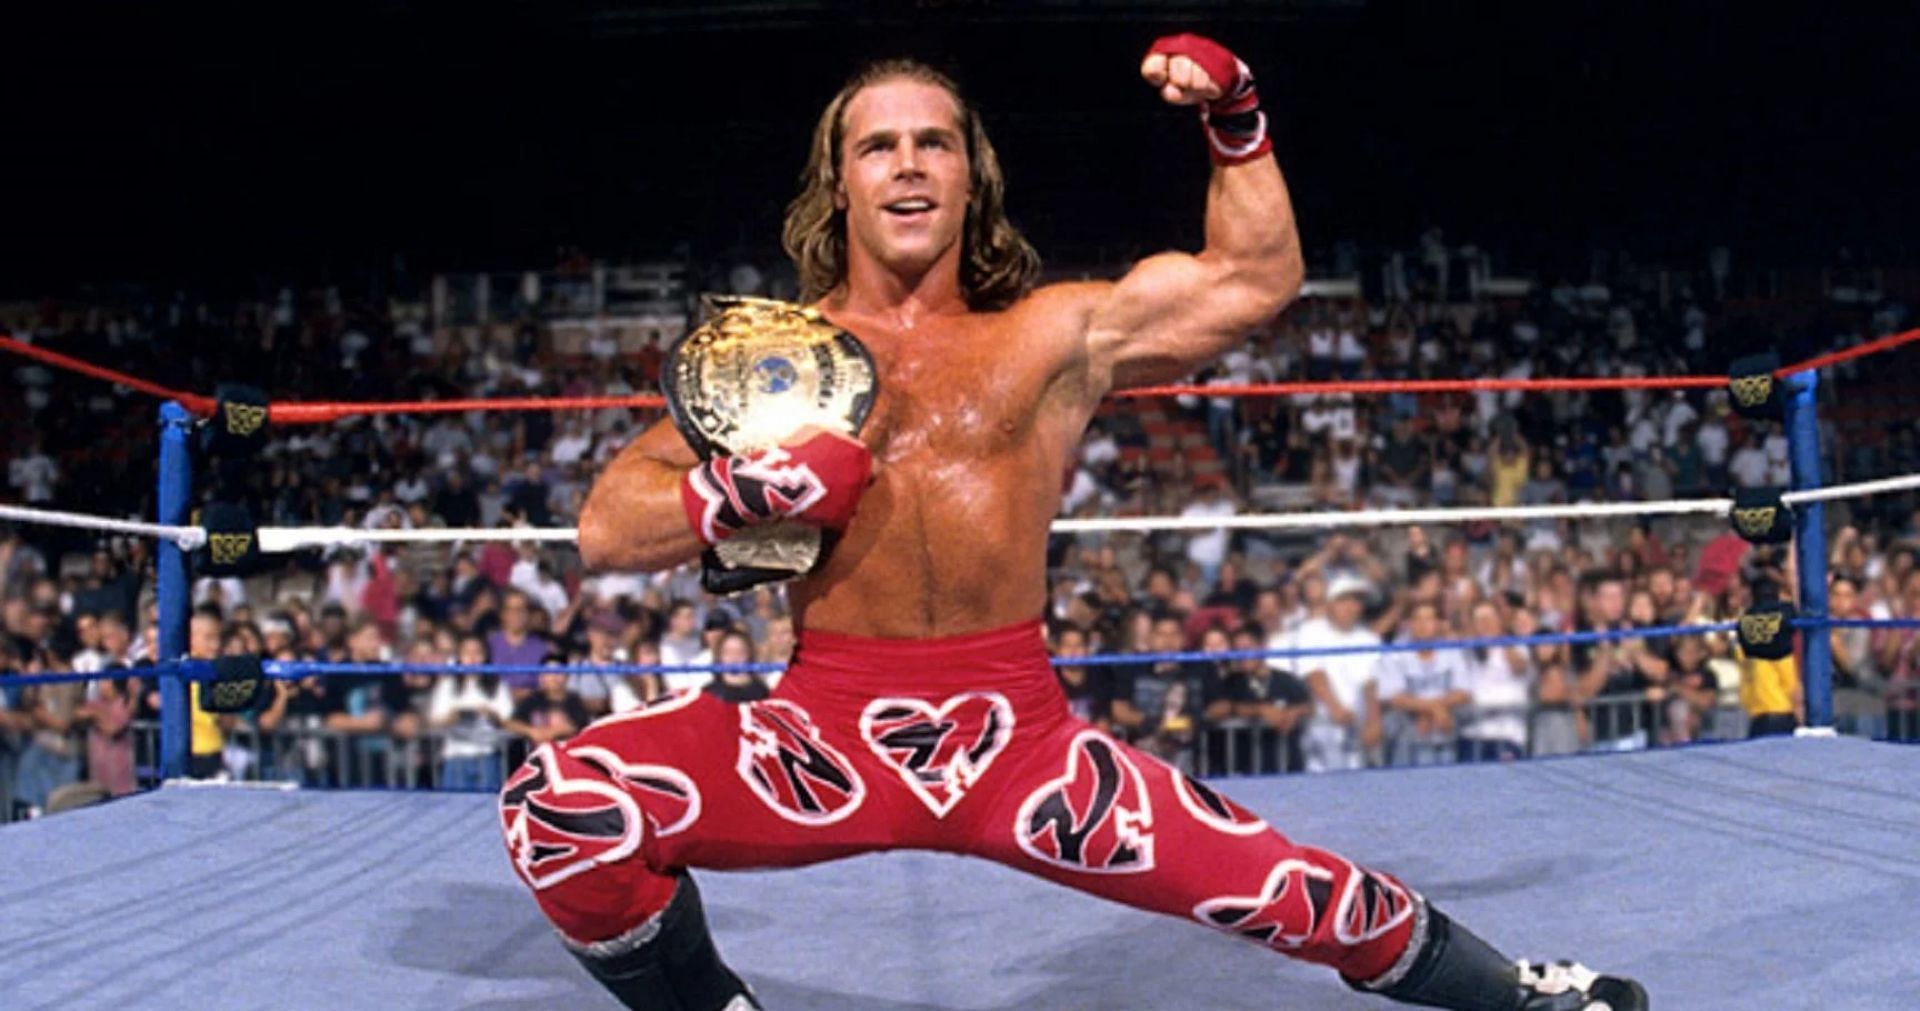 Shawn Michaels as the WWE Champion